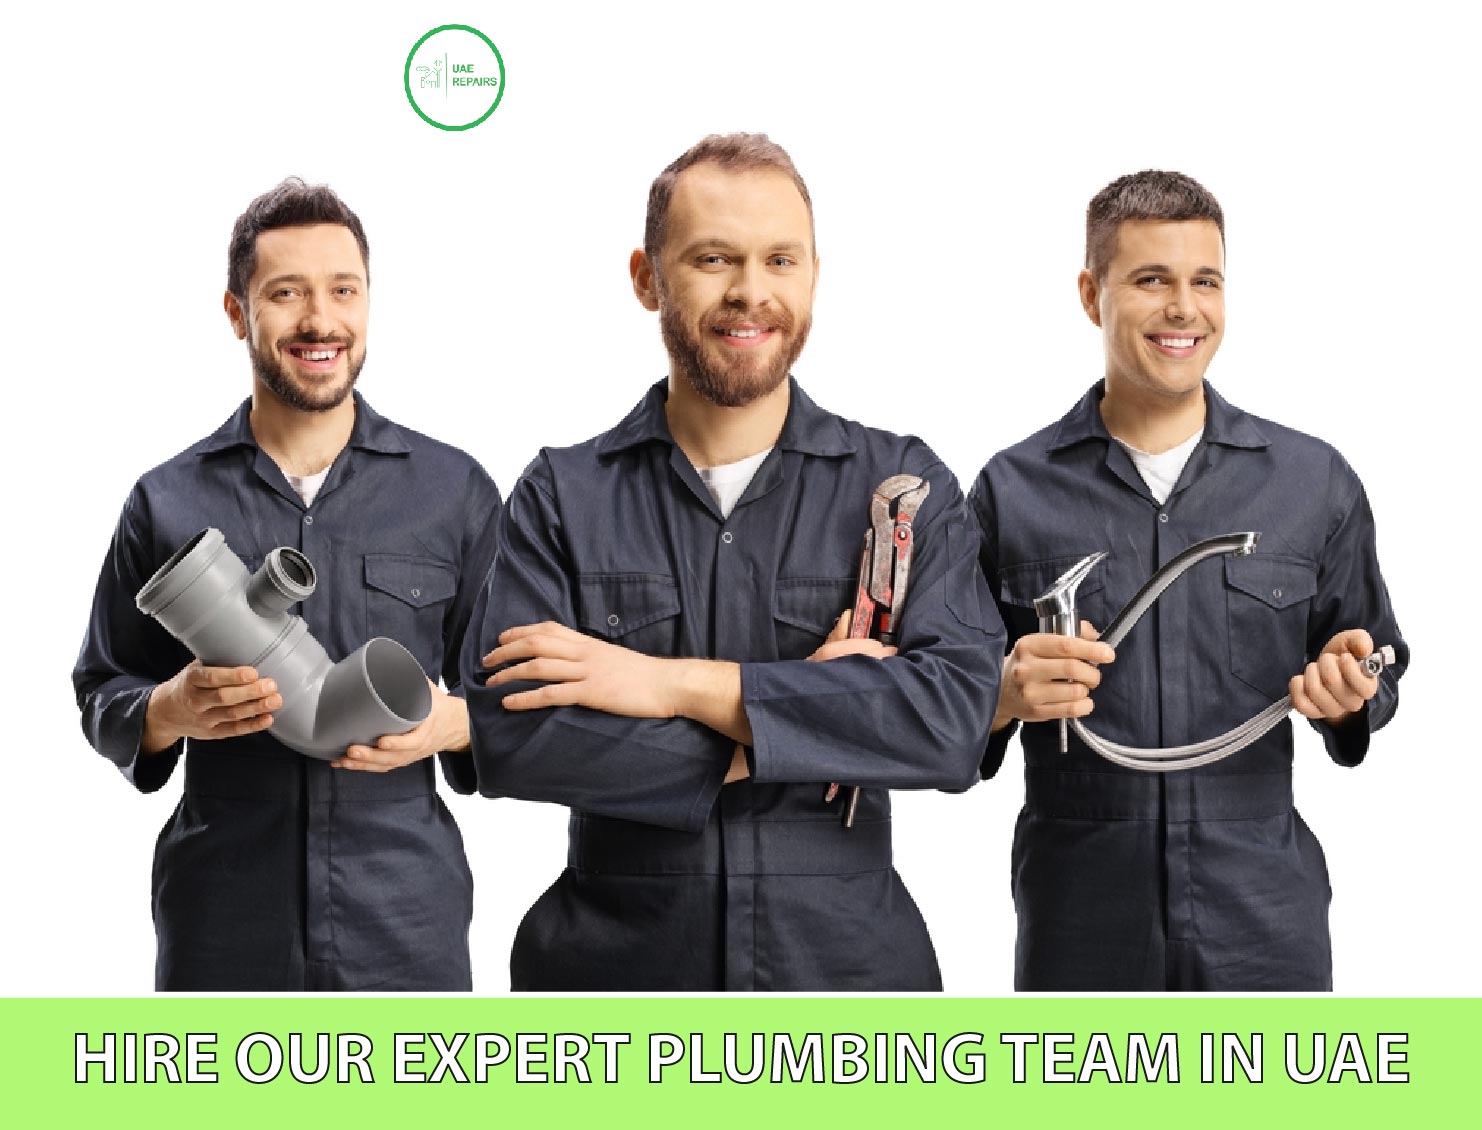 HIRE UAE REPAIRS EXPERT PLUMBING TEAM Friendly and Approachable Team Expert Guidance Thorough Problem Analysis Efficient and Professional Service Clear and Professional Communication